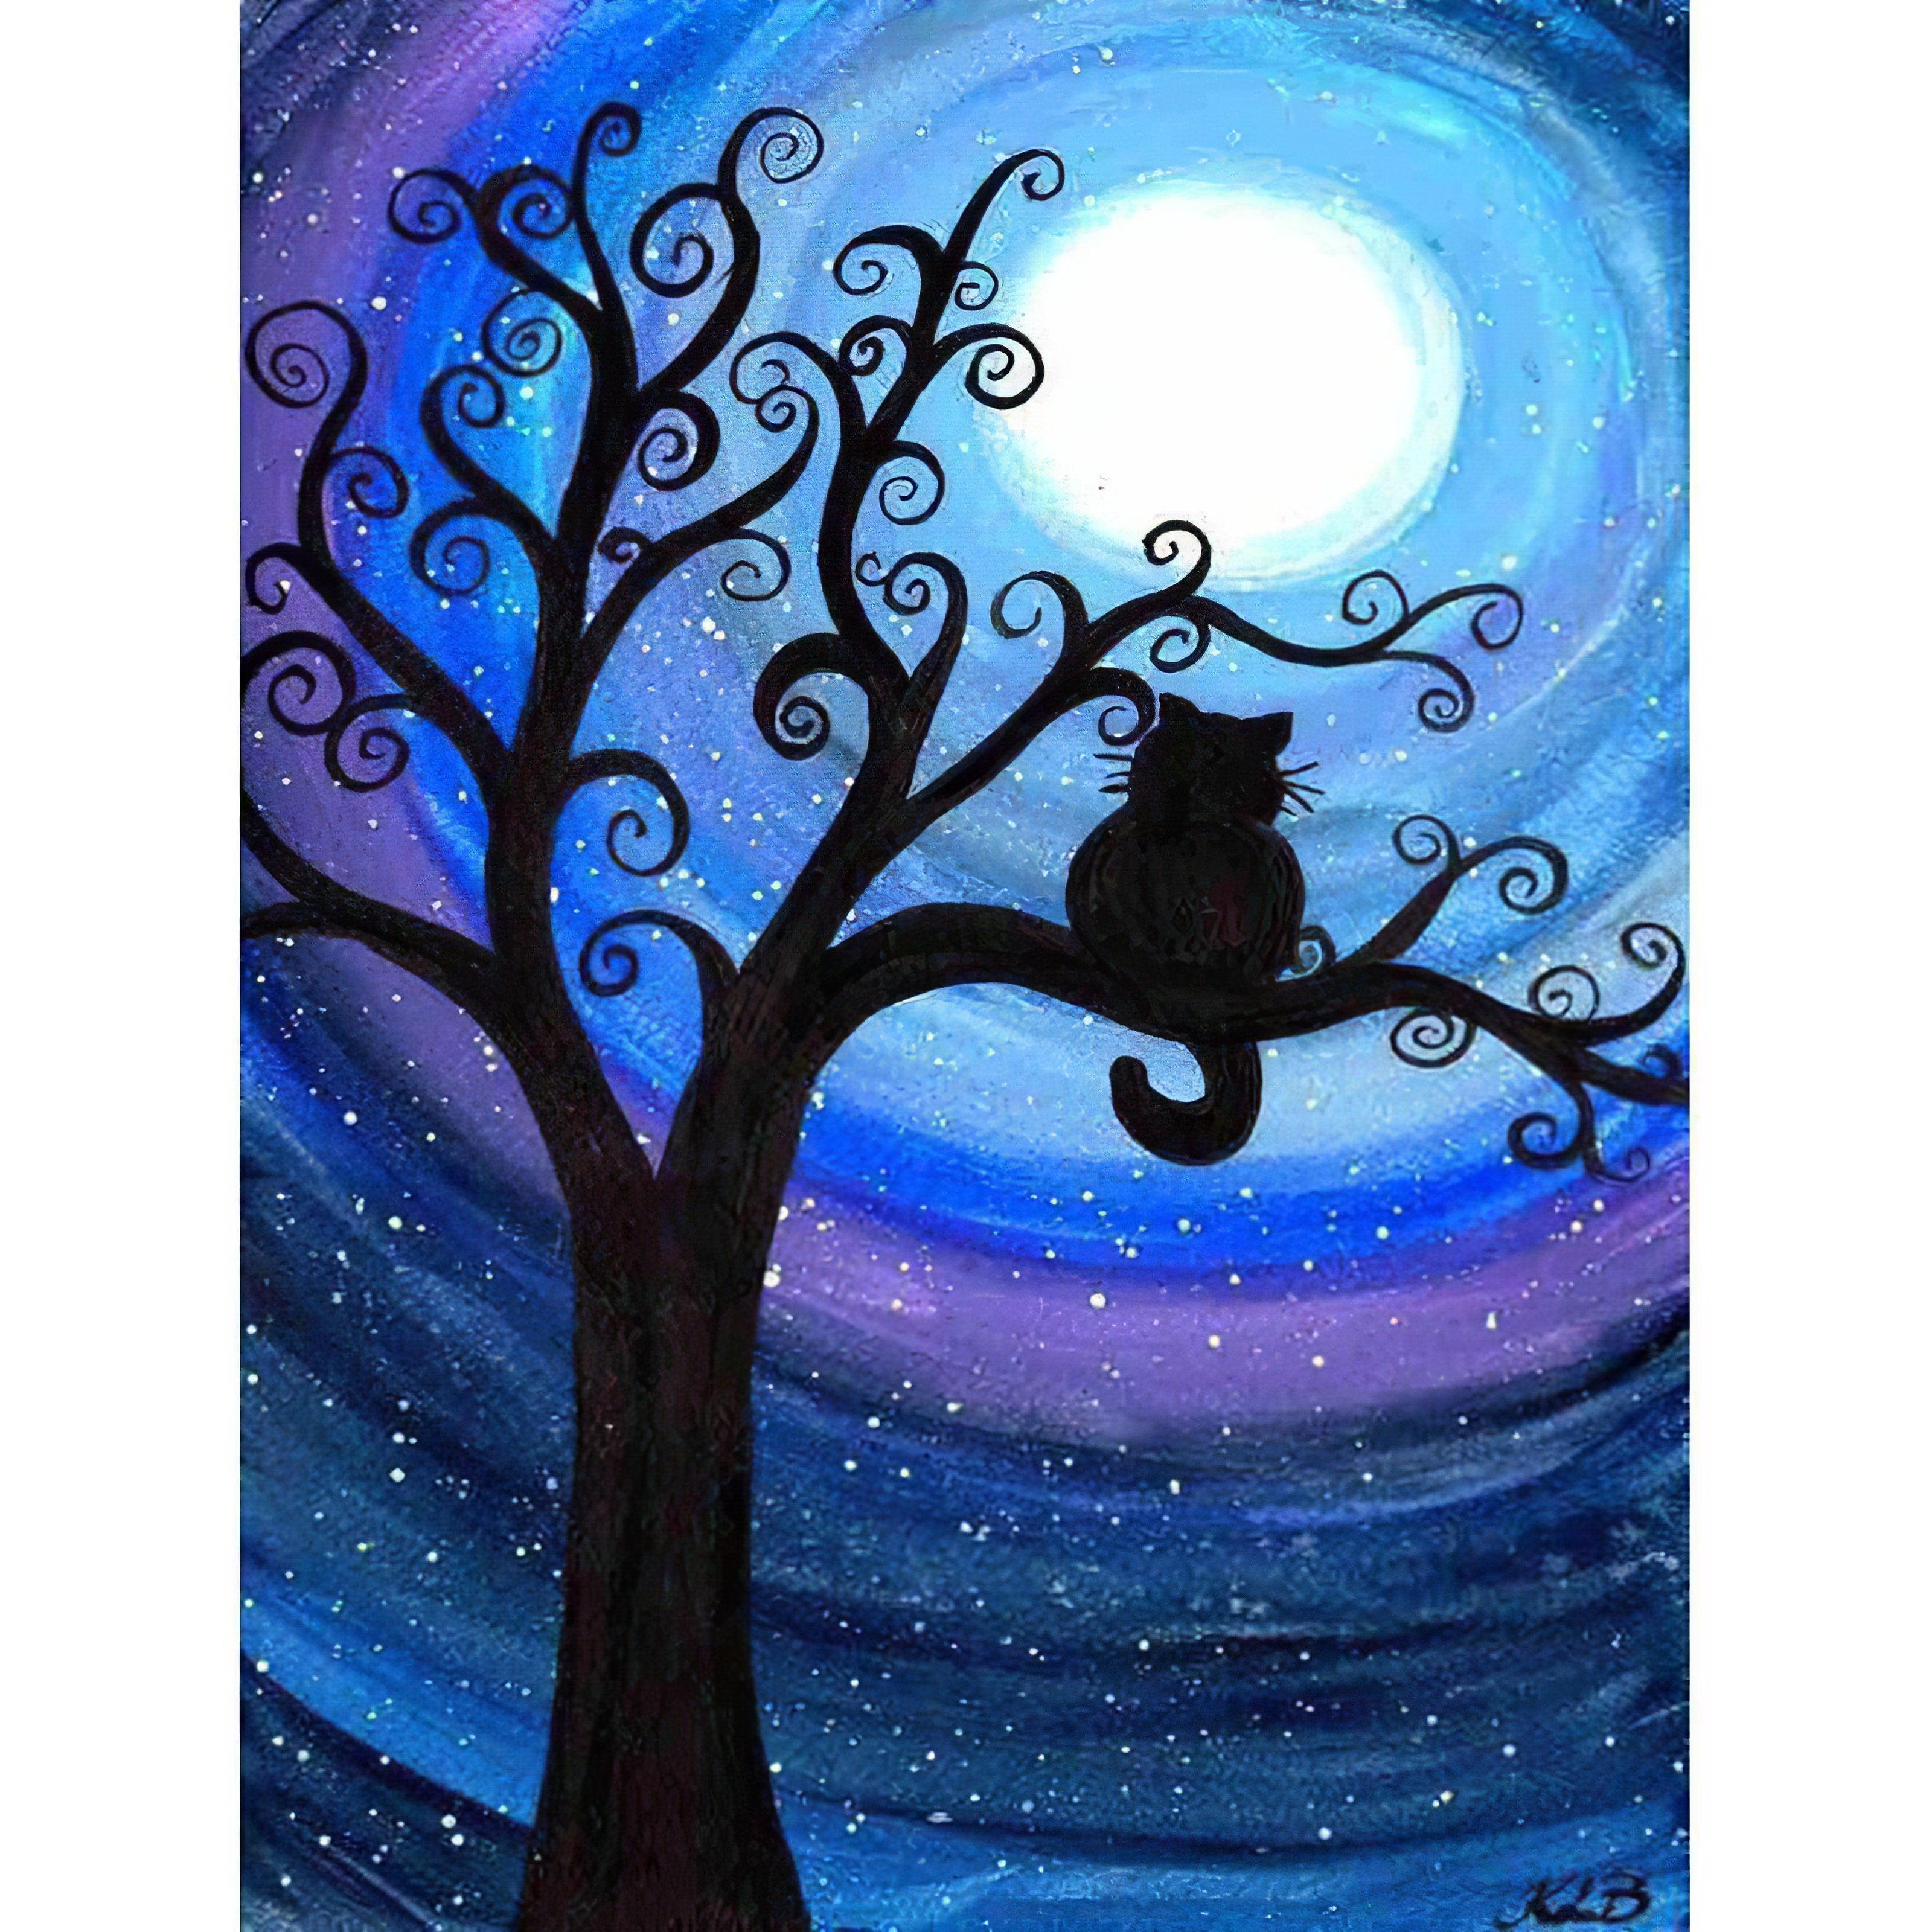 A black cat under the moonlight, merging mystery with night's allure. Black Cat And Moon - Diamondartlove